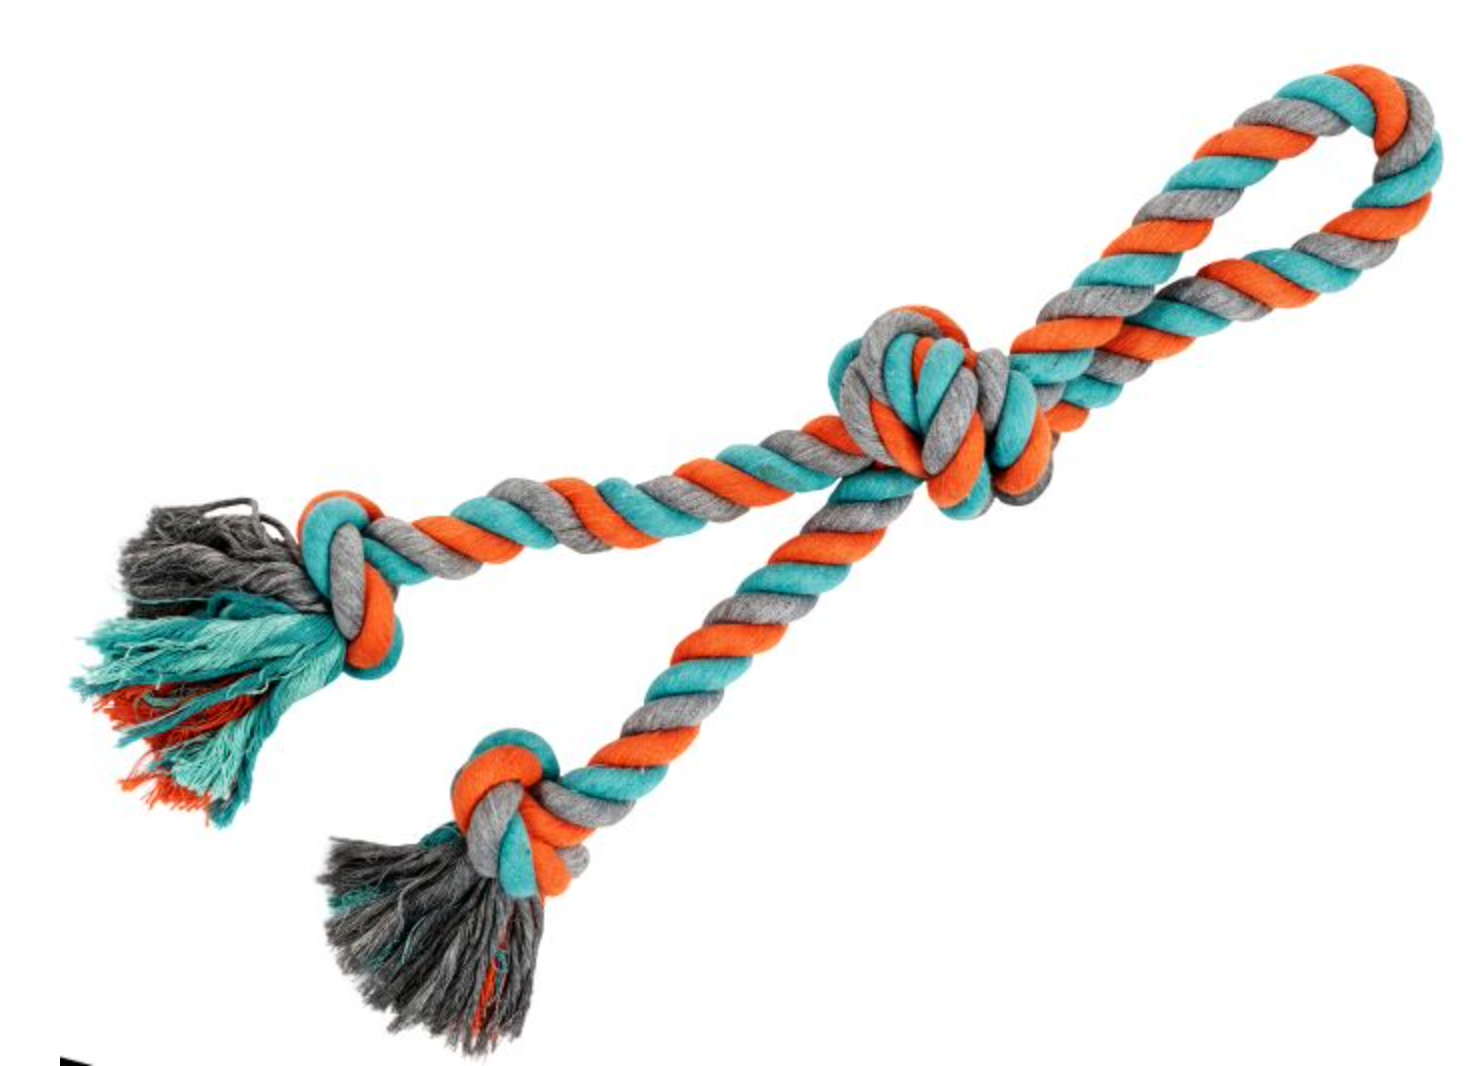 Bud'z Rope Double With 3 Knots - Orange And Blue Dog Toy (23.5")